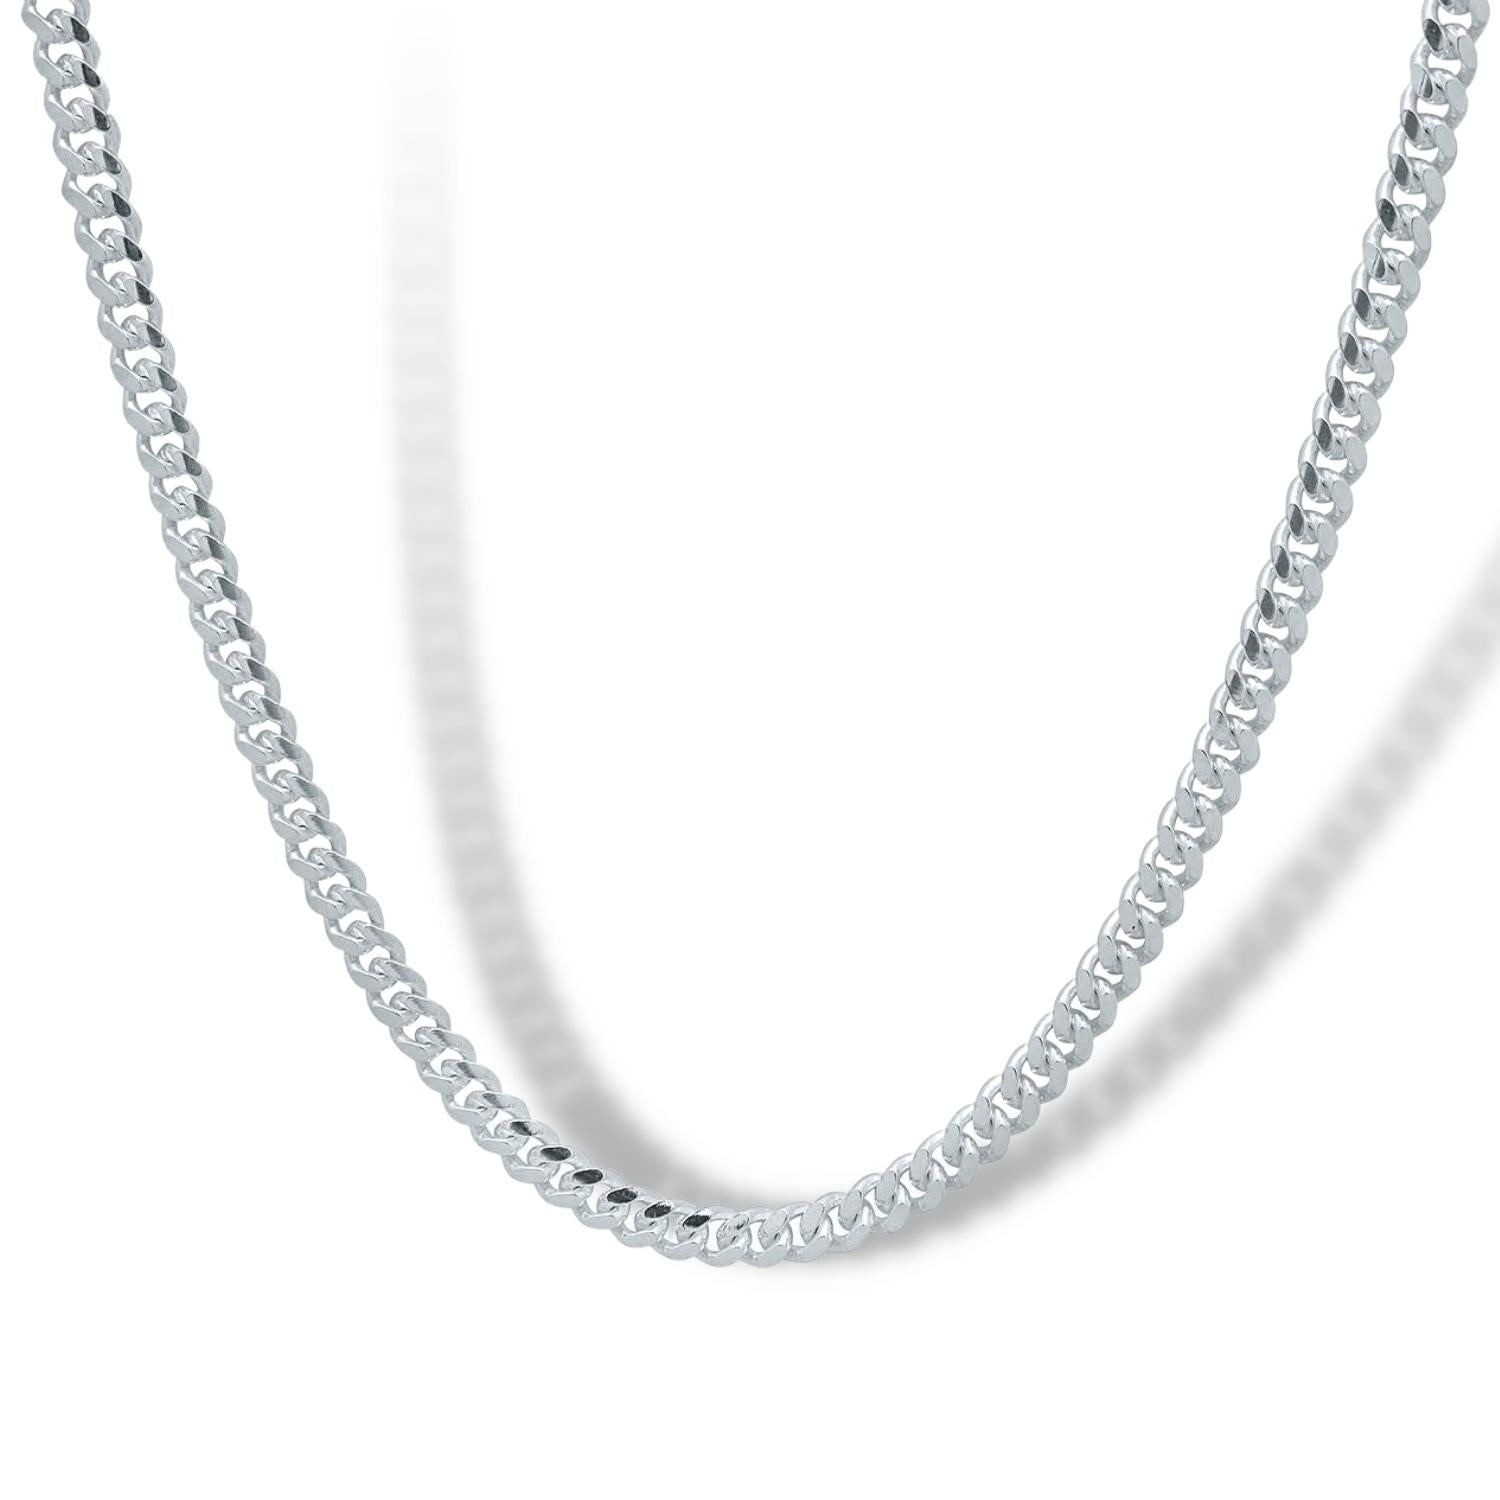 Solid White Gold Miami Cuban Chain 4mm Width